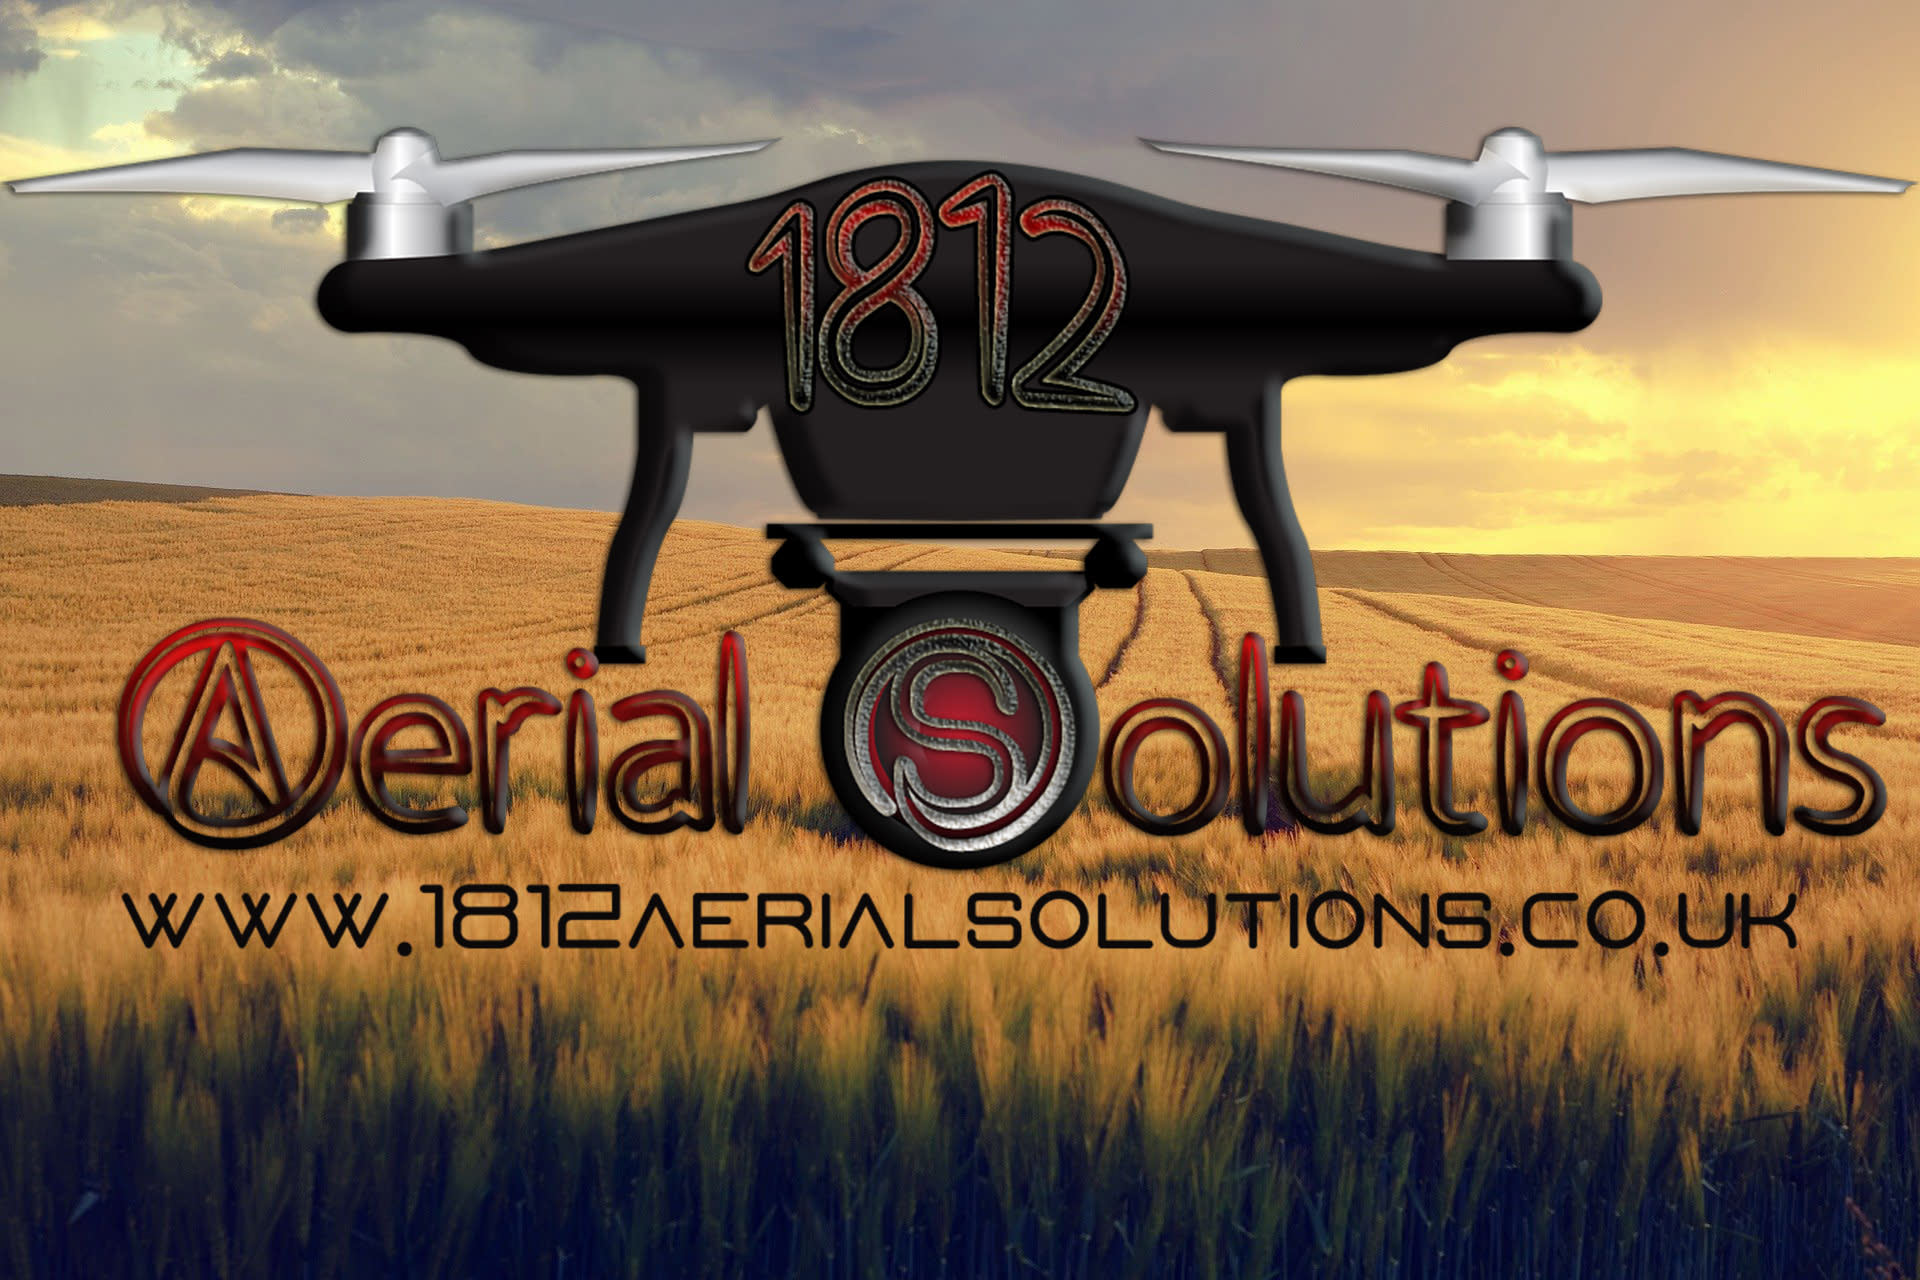 1812 Aerial Solutions